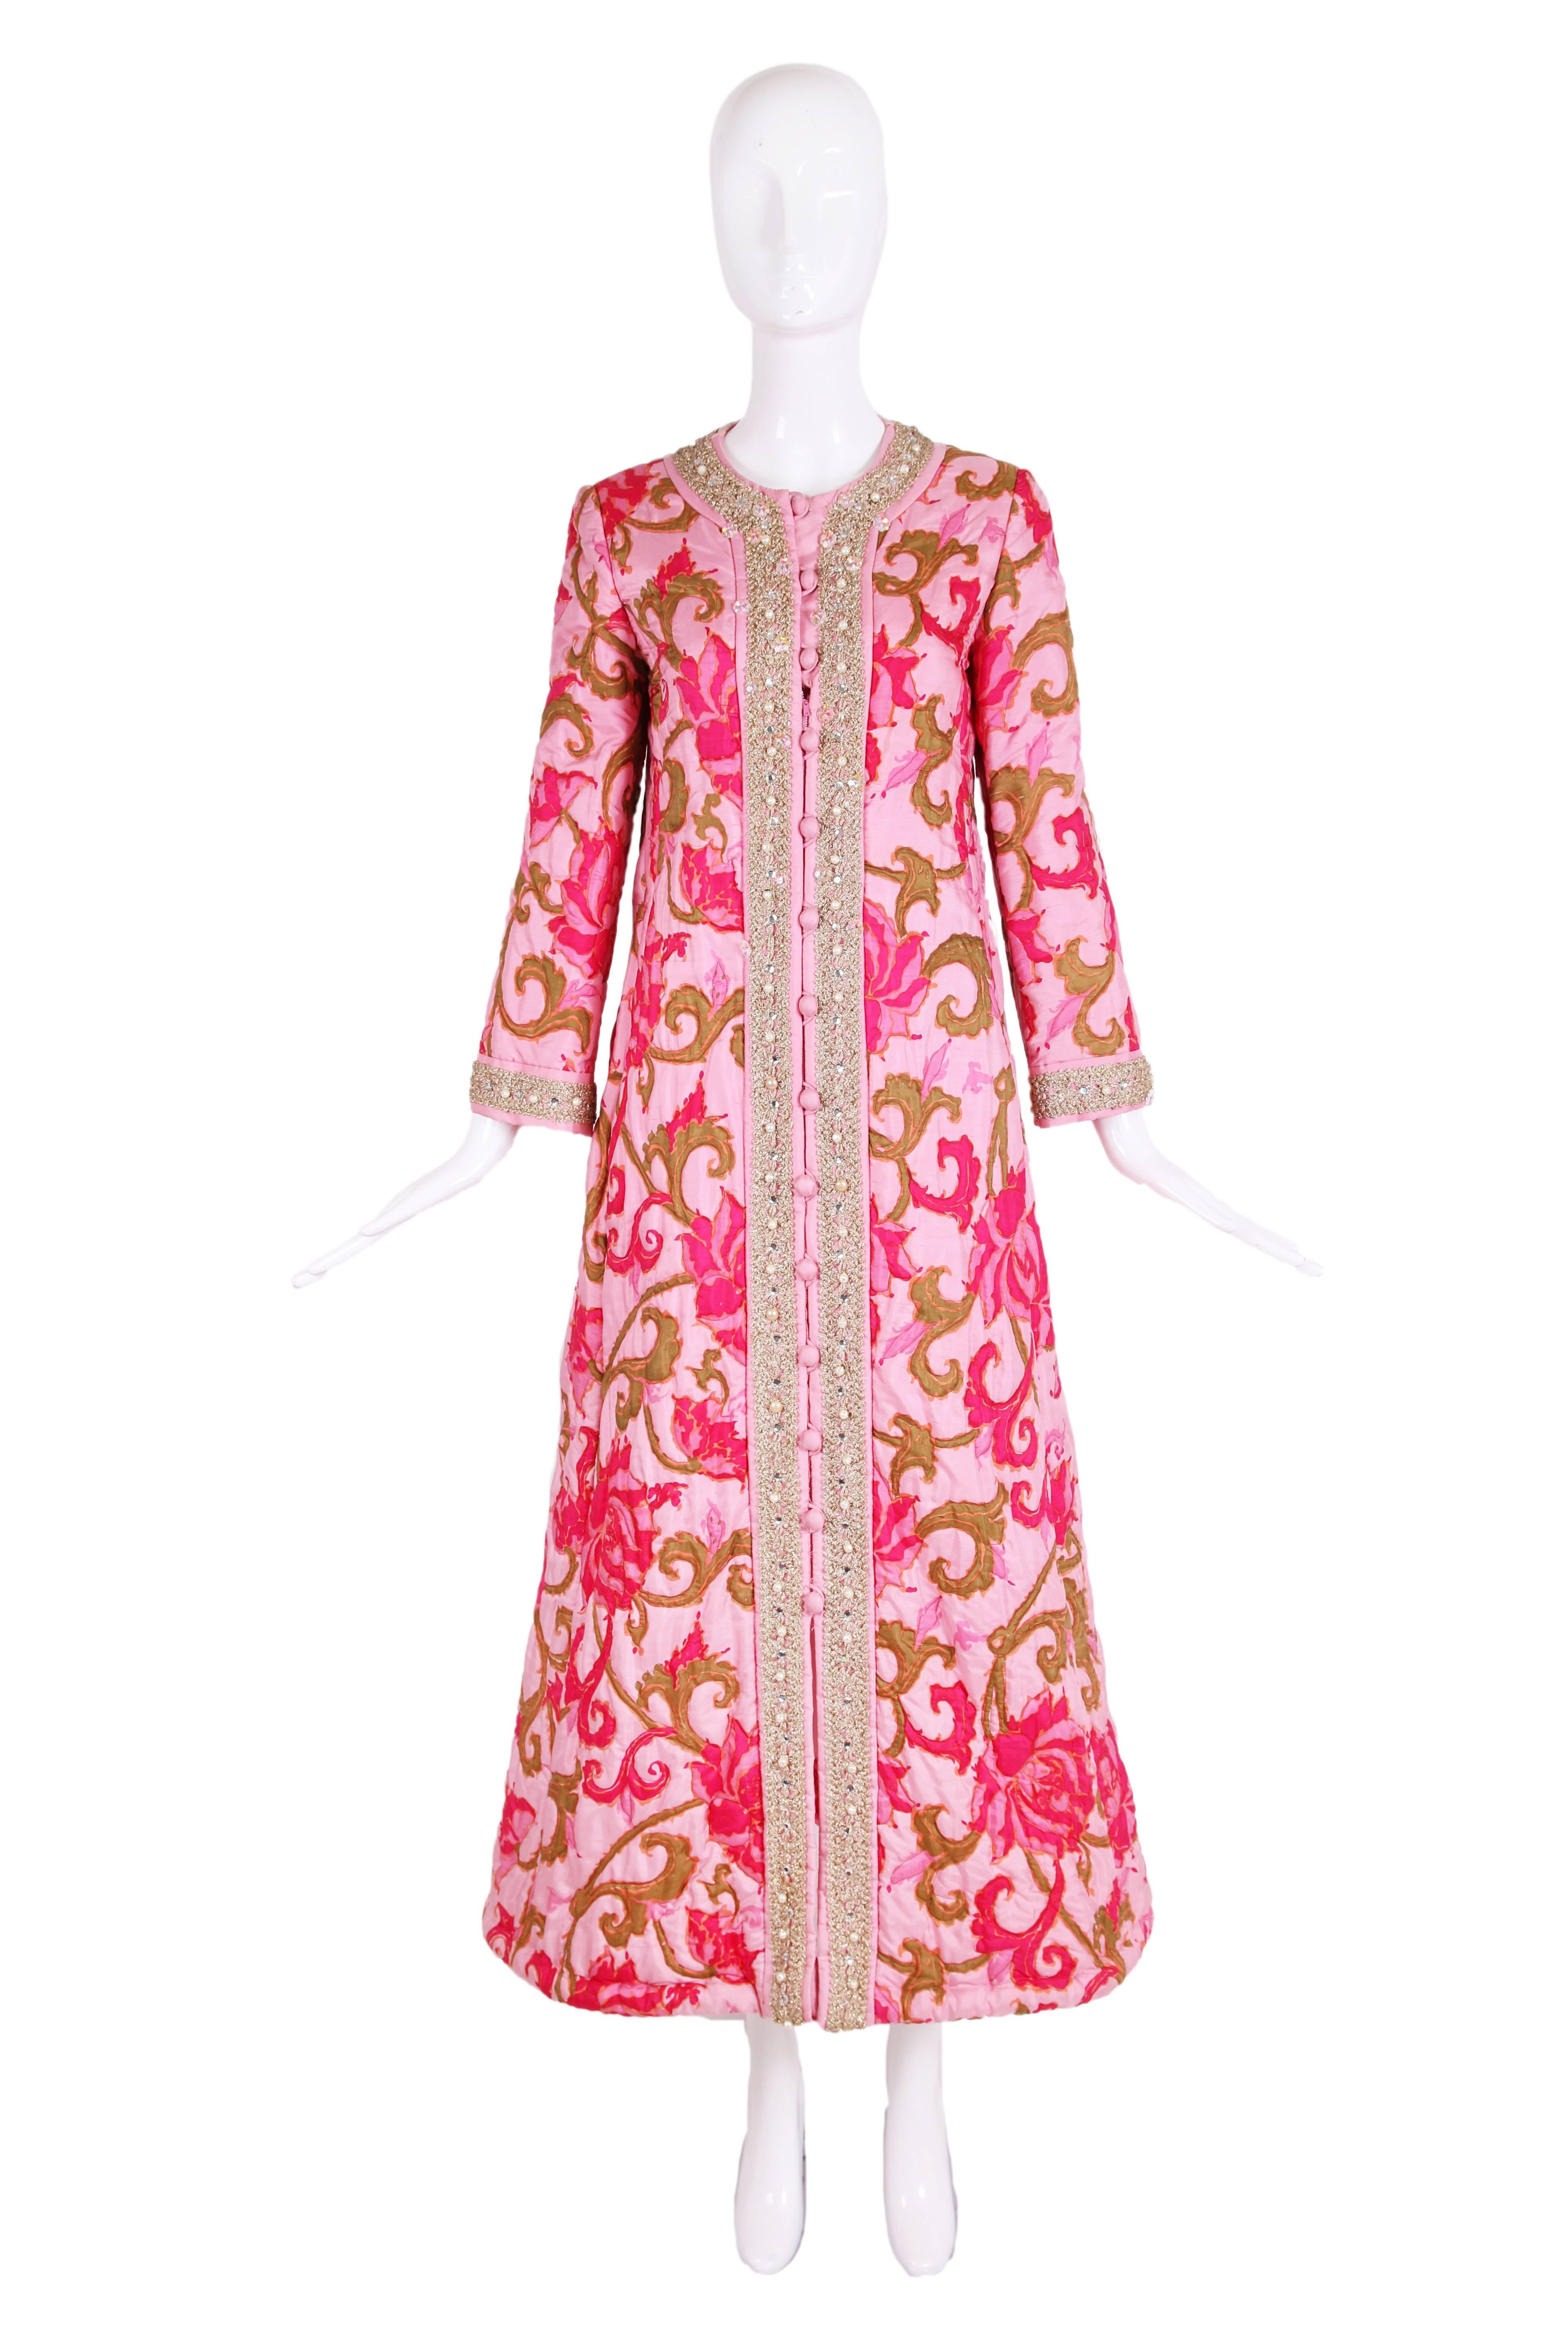 1970's Malcom Starr quilted house coat featuring an abstract floral print in shades of pink, orange and olive green. There is gold appliqued trim with white pearls, silver beads, and iridescent flower-shaped beads at center front trim, collar and